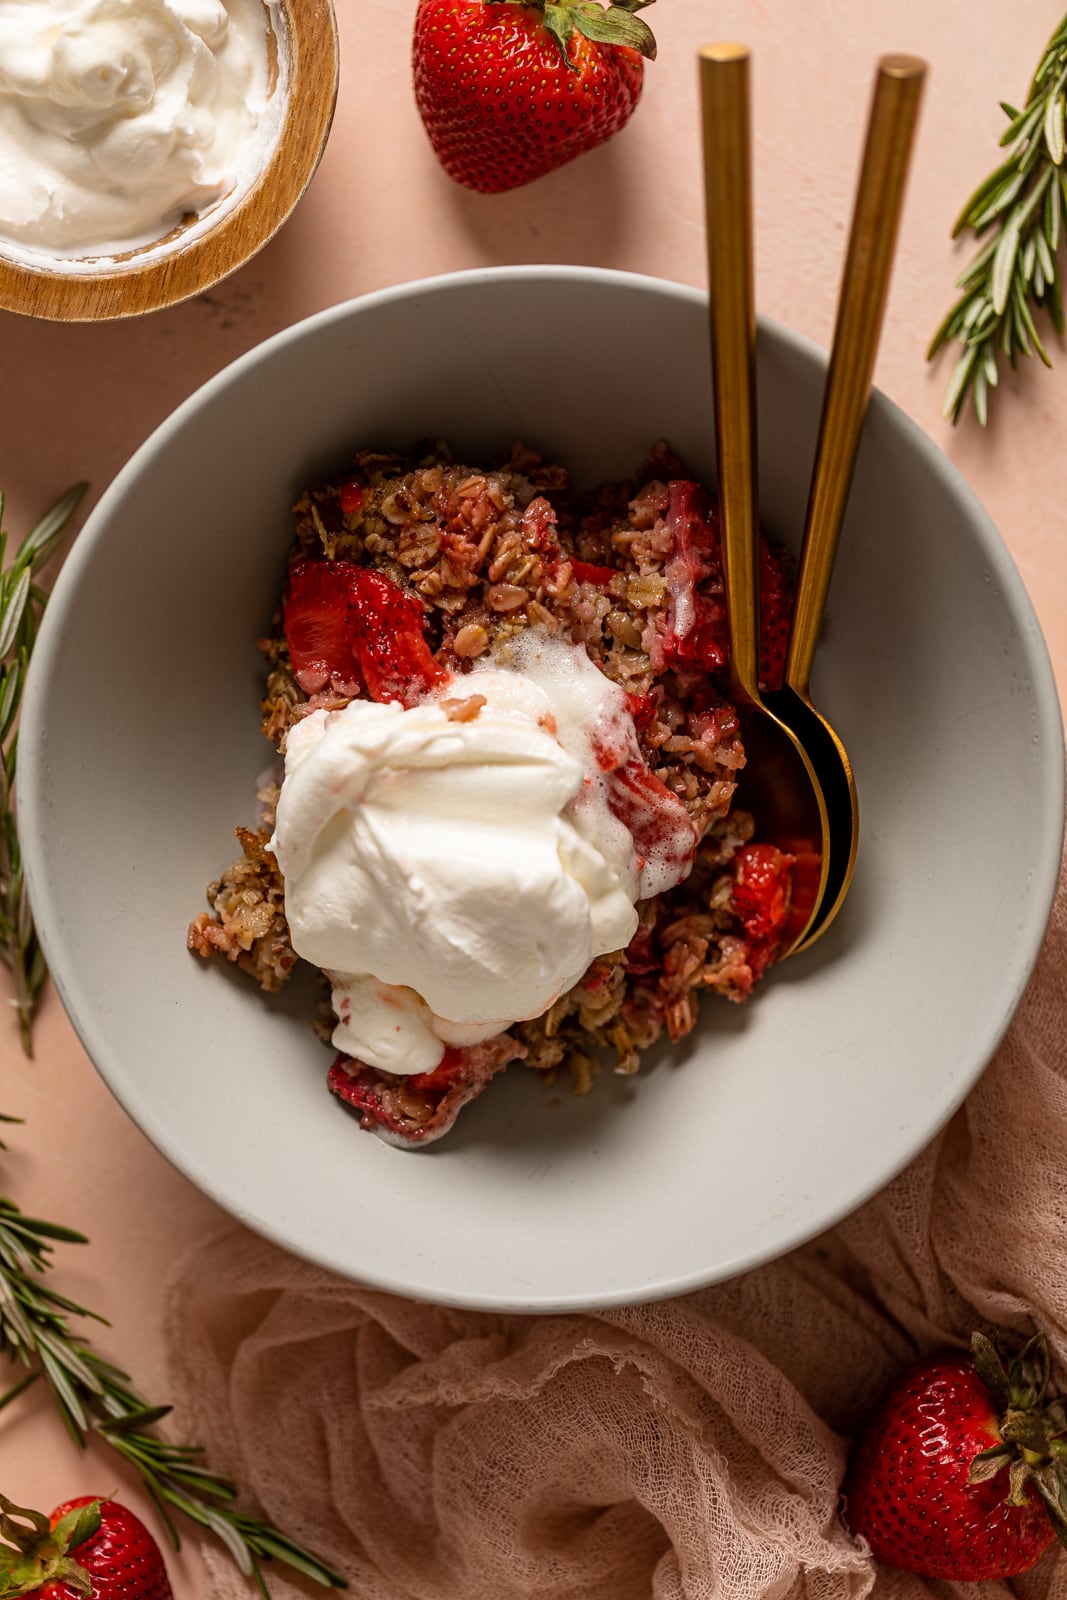 Bowl of Strawberry Shortcake Baked Oats topped with strawberry sauce and coconut whipped cream